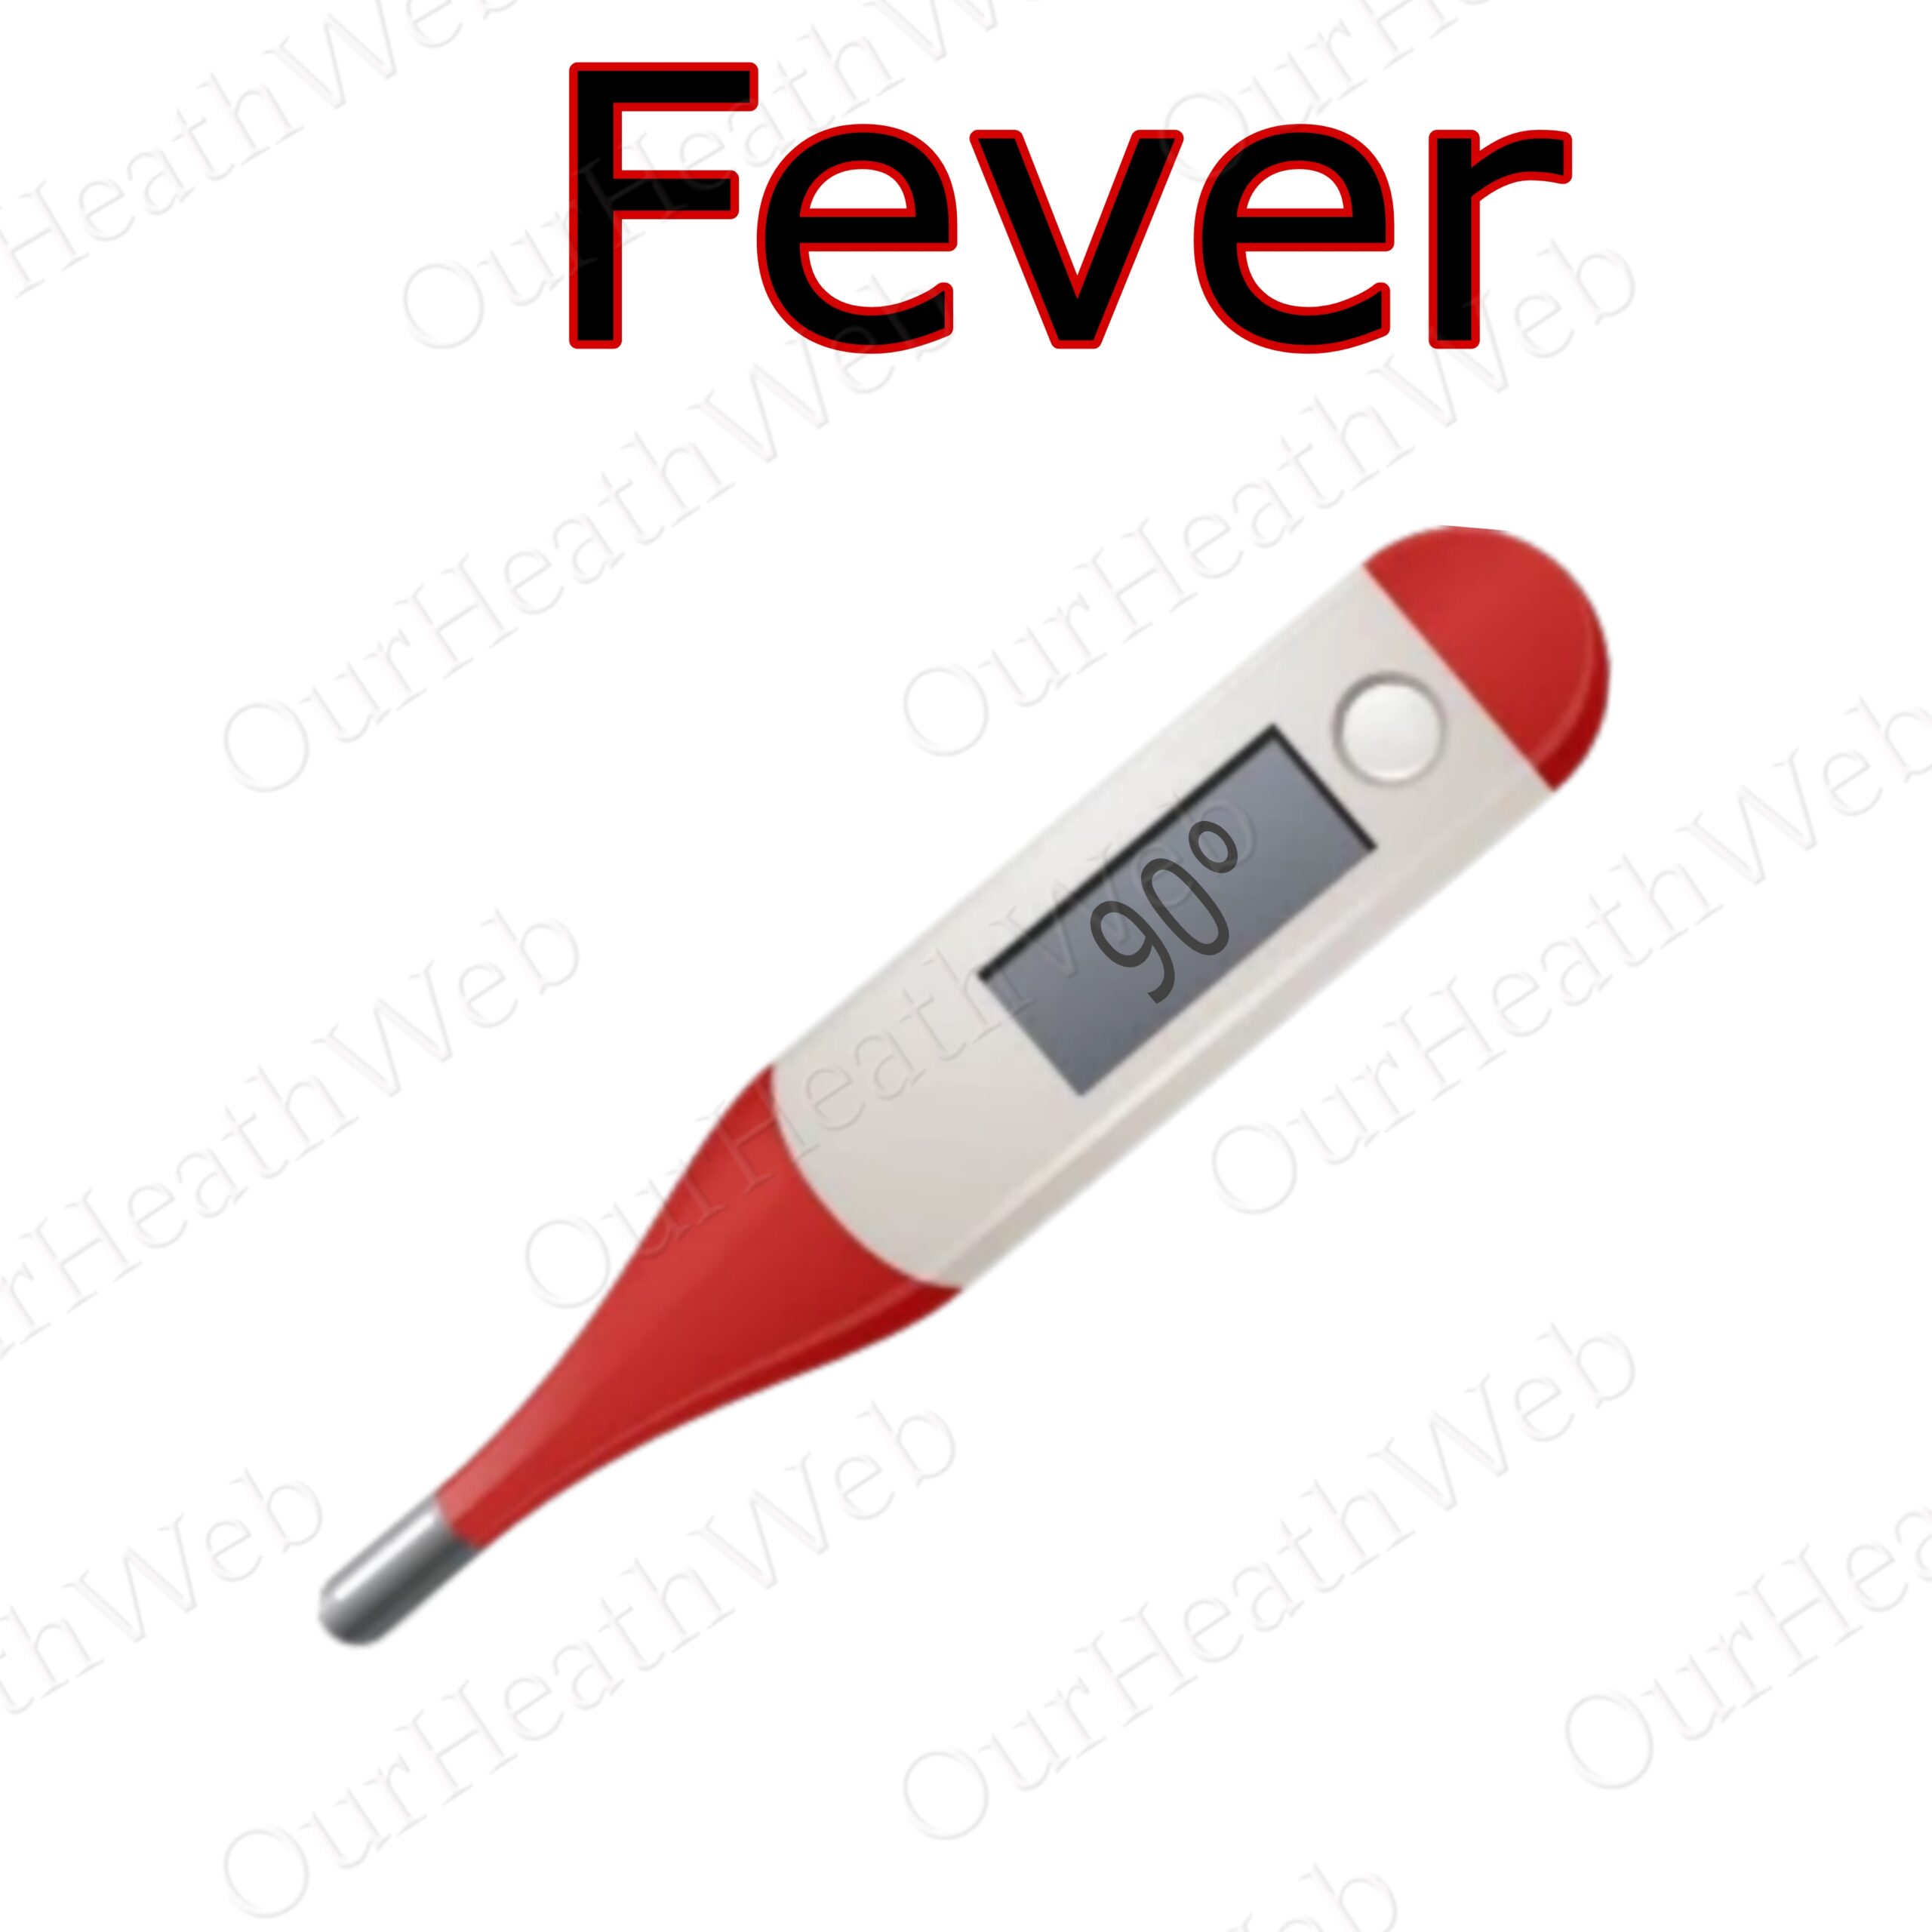 Everything You Need to Know About Fever